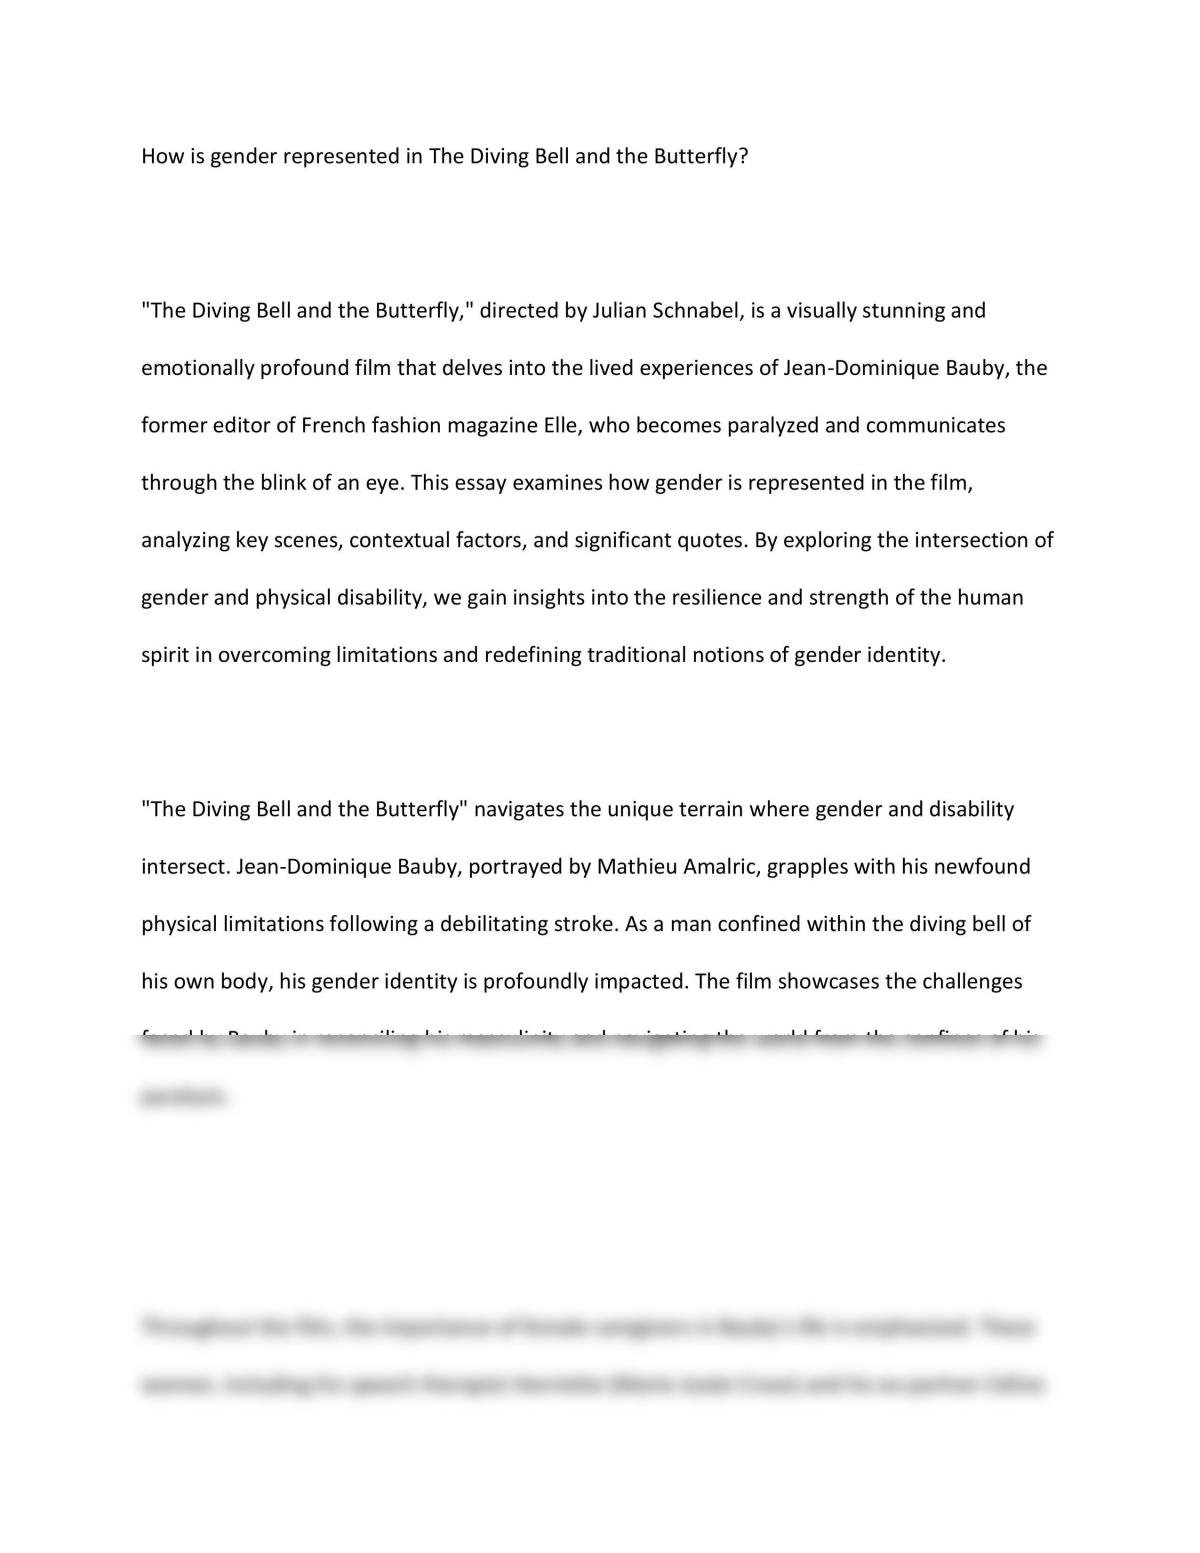 Essay on Gender in the Diving Bell and the Butterfly - Page 1